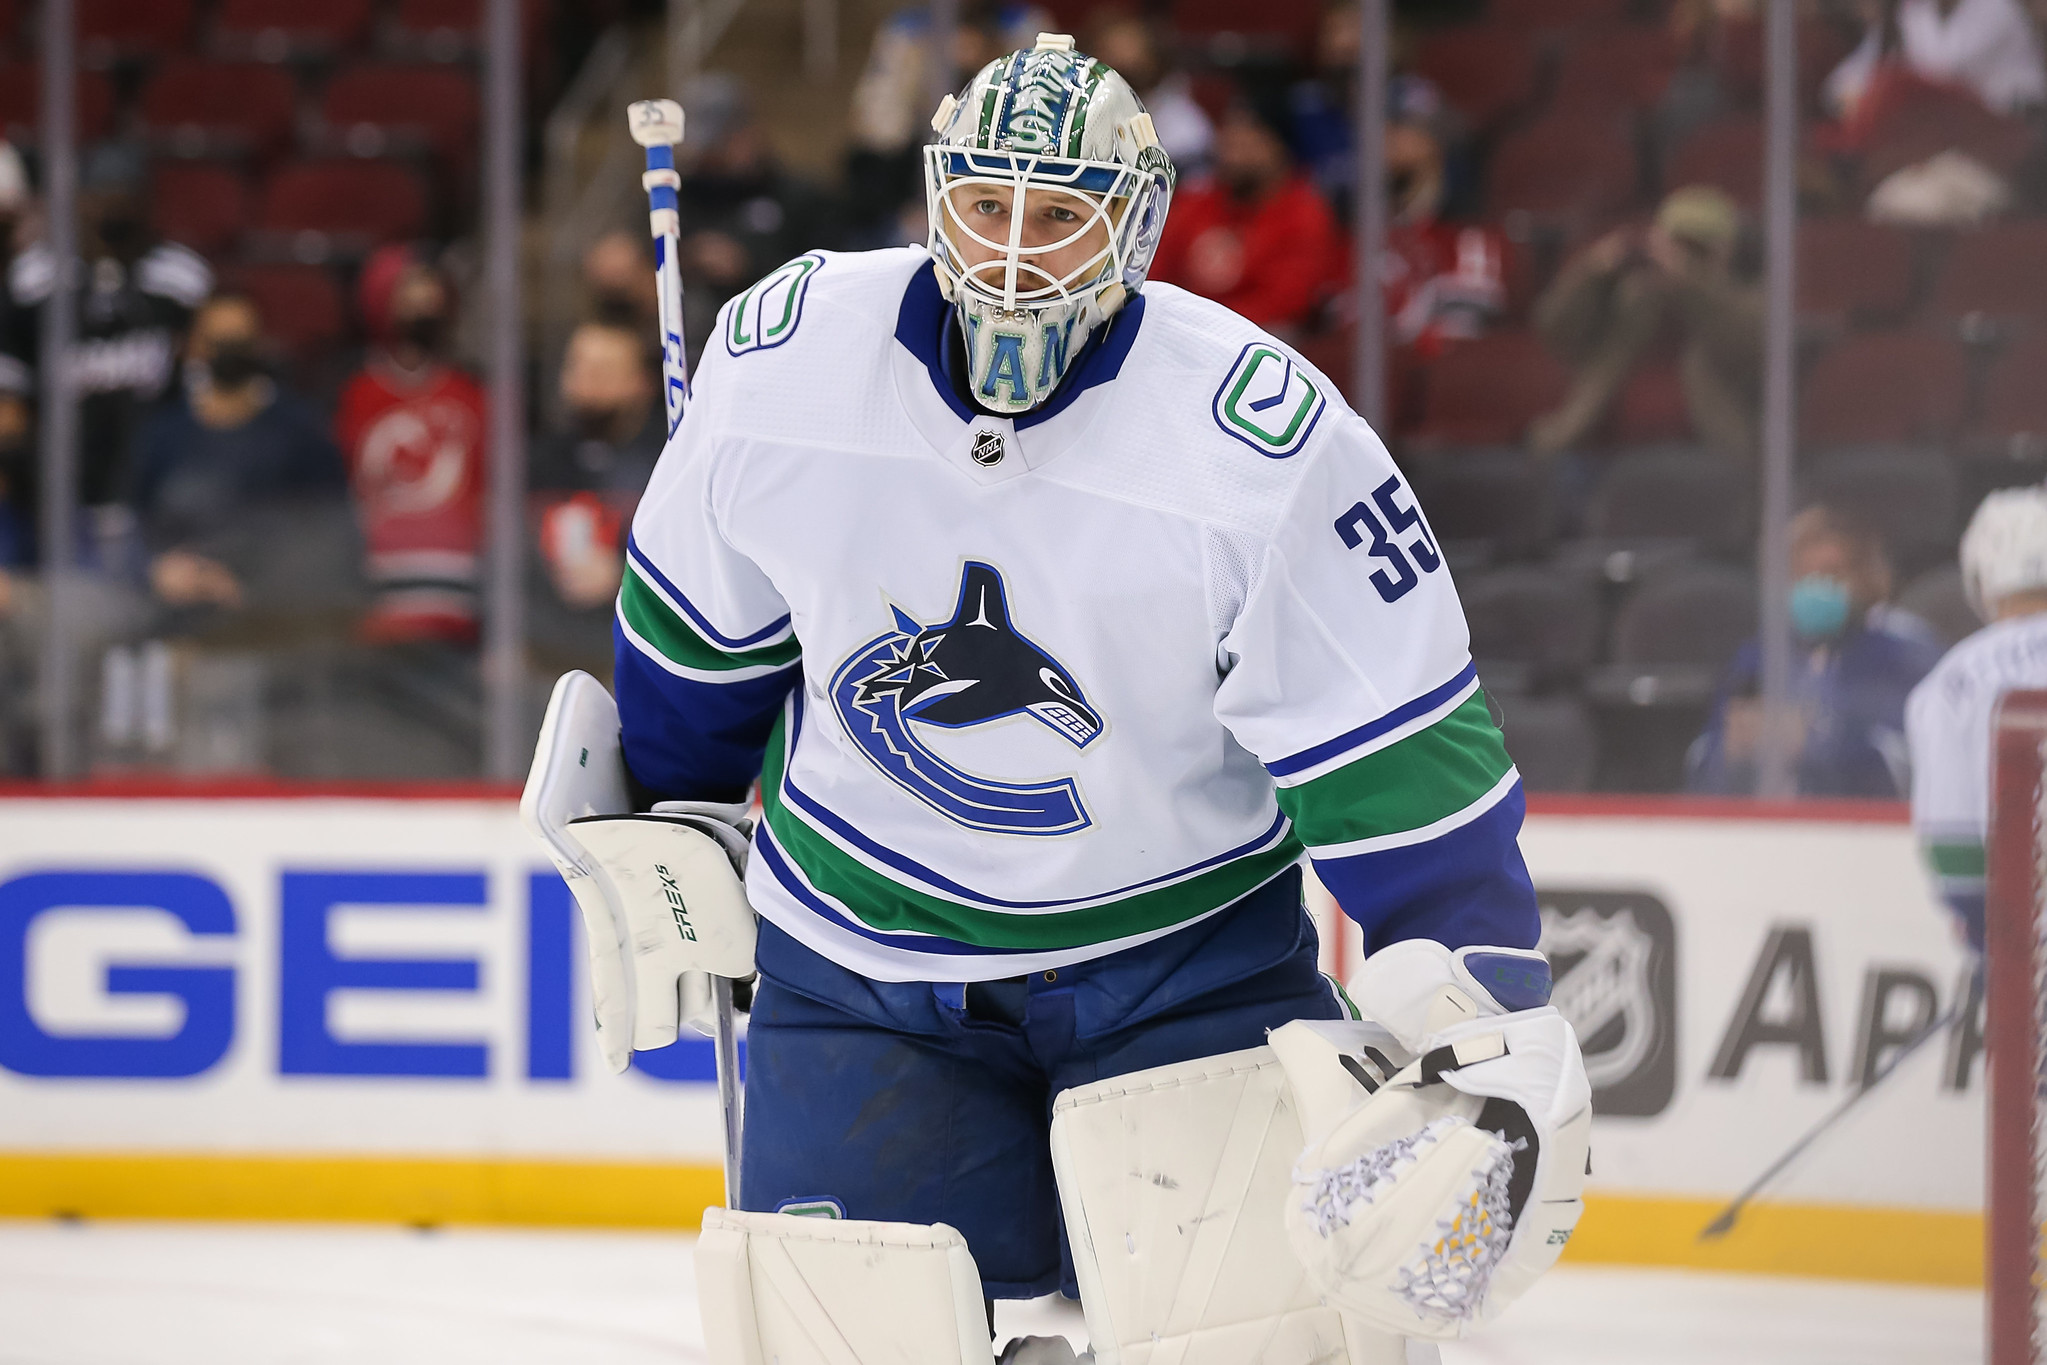 Goalie Gear Nerd on X: Love Thatcher Demko's new @goaliesonly gear on many  levels. The design itself masterfully incorporates the retro @Canucks logo  and iconic jersey stripes. The “Vancouver” type filling the